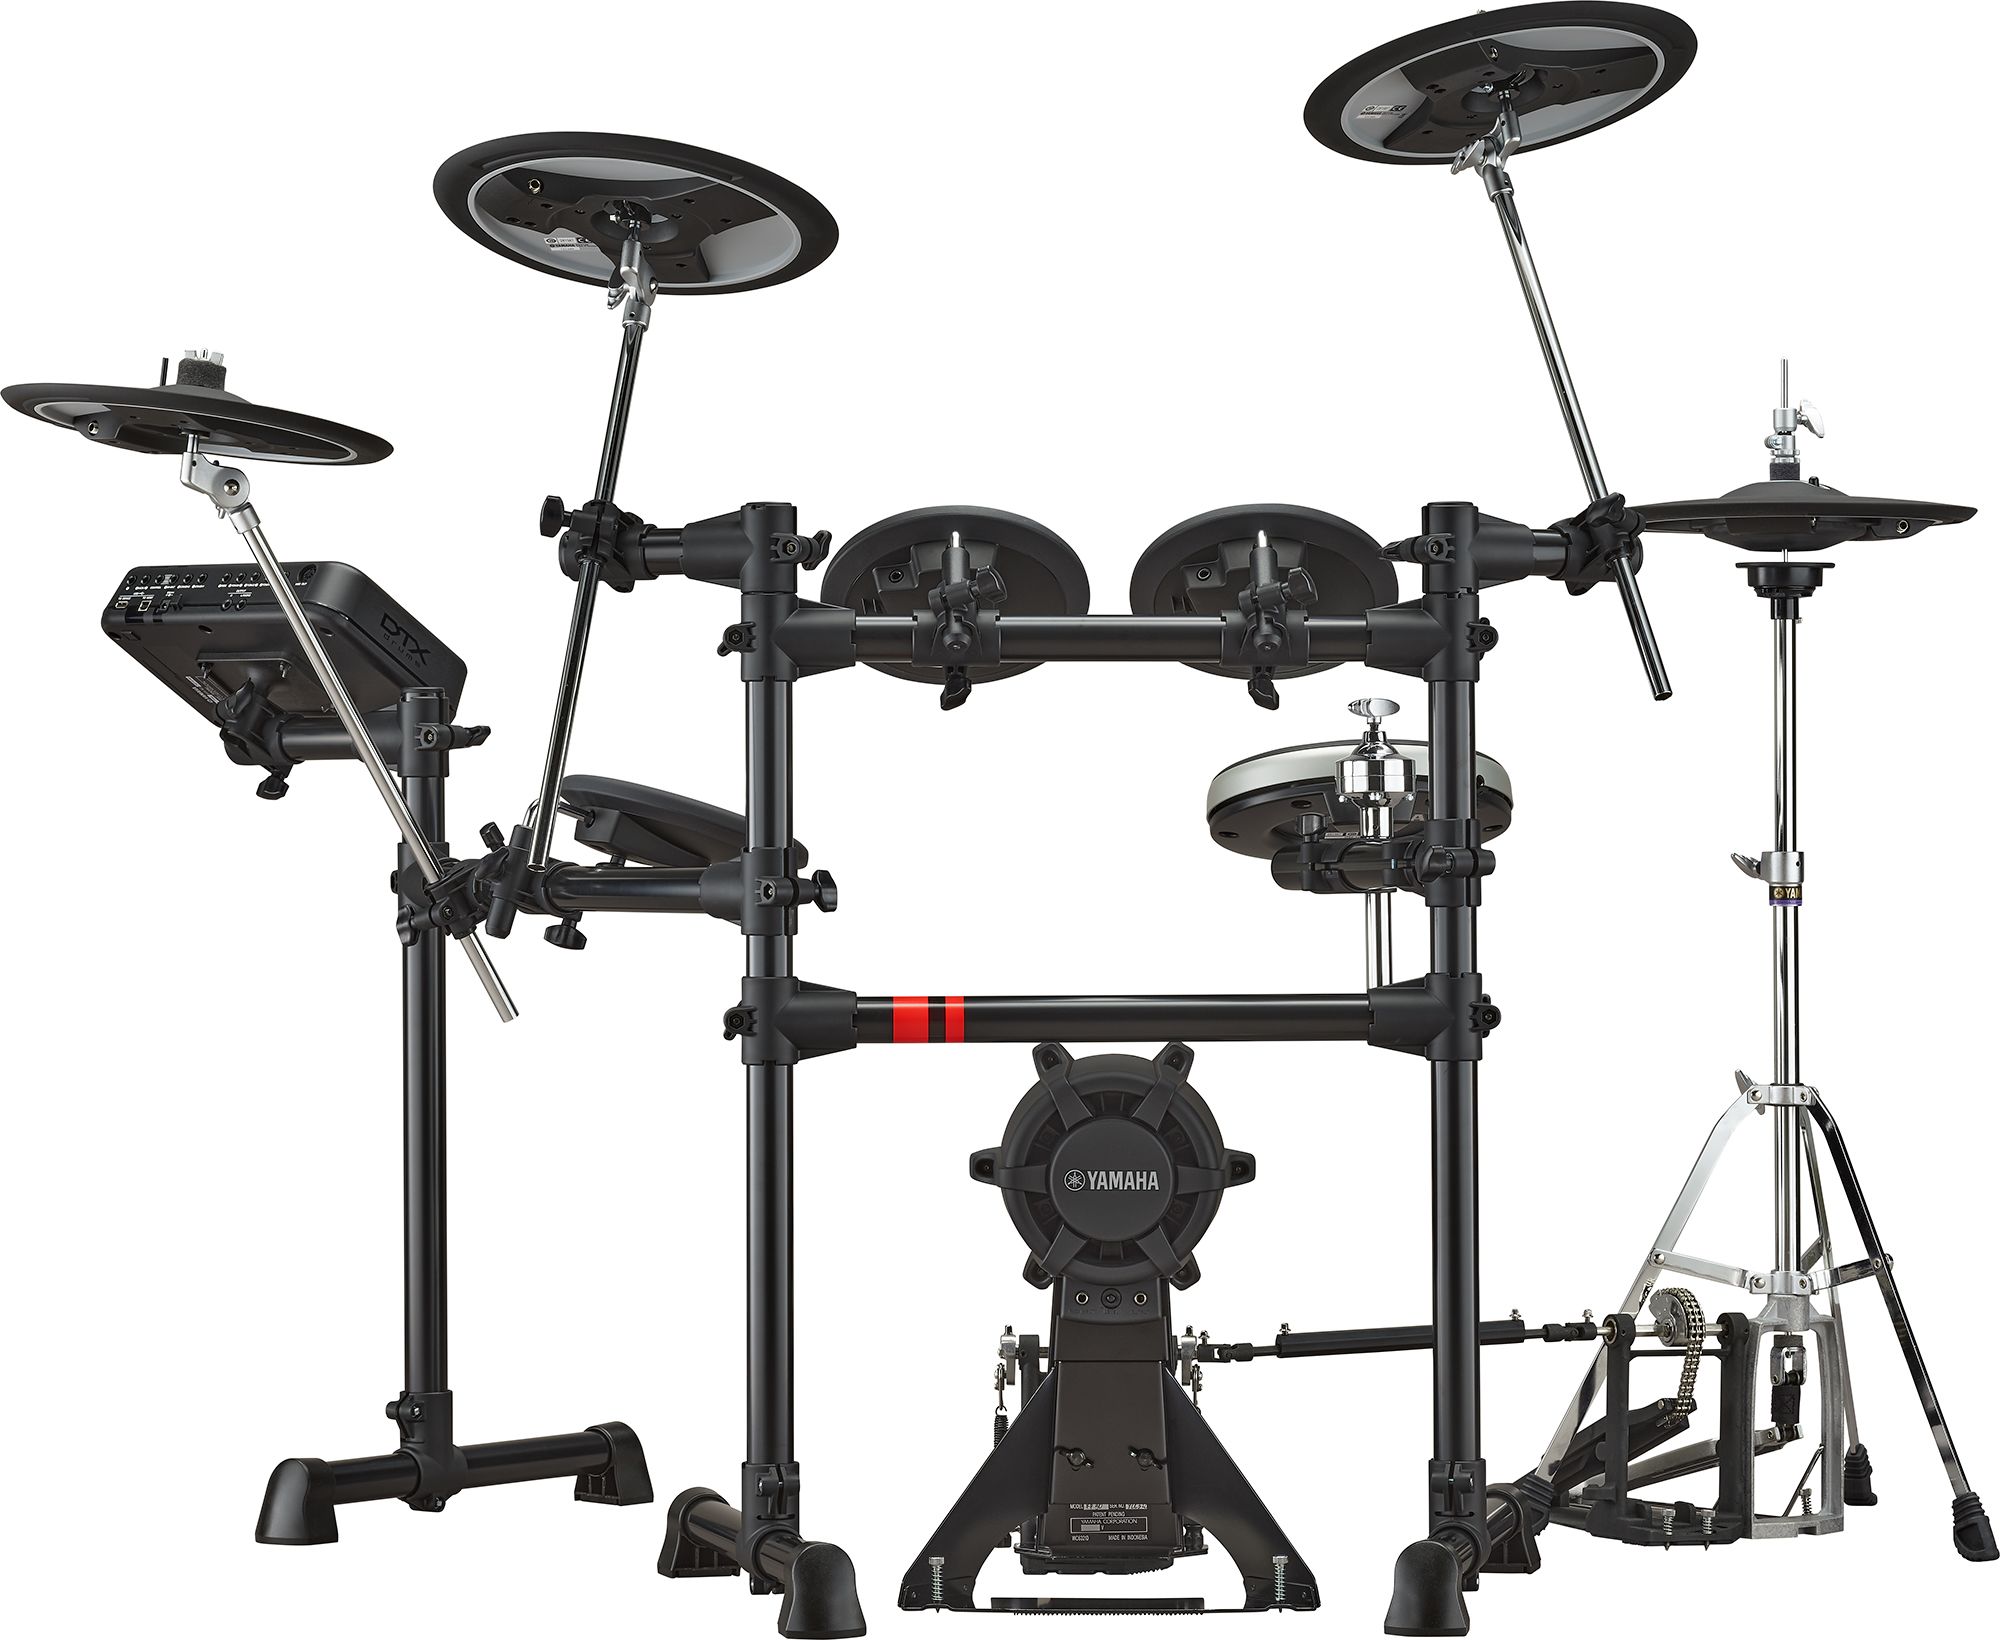 DTX6 Series - / Drums - East Electronic / / Drum / America Drums Kits Latin Asia CIS Products Middle - Electronic Yamaha - Oceania Musical Instruments - - / Products Africa - 